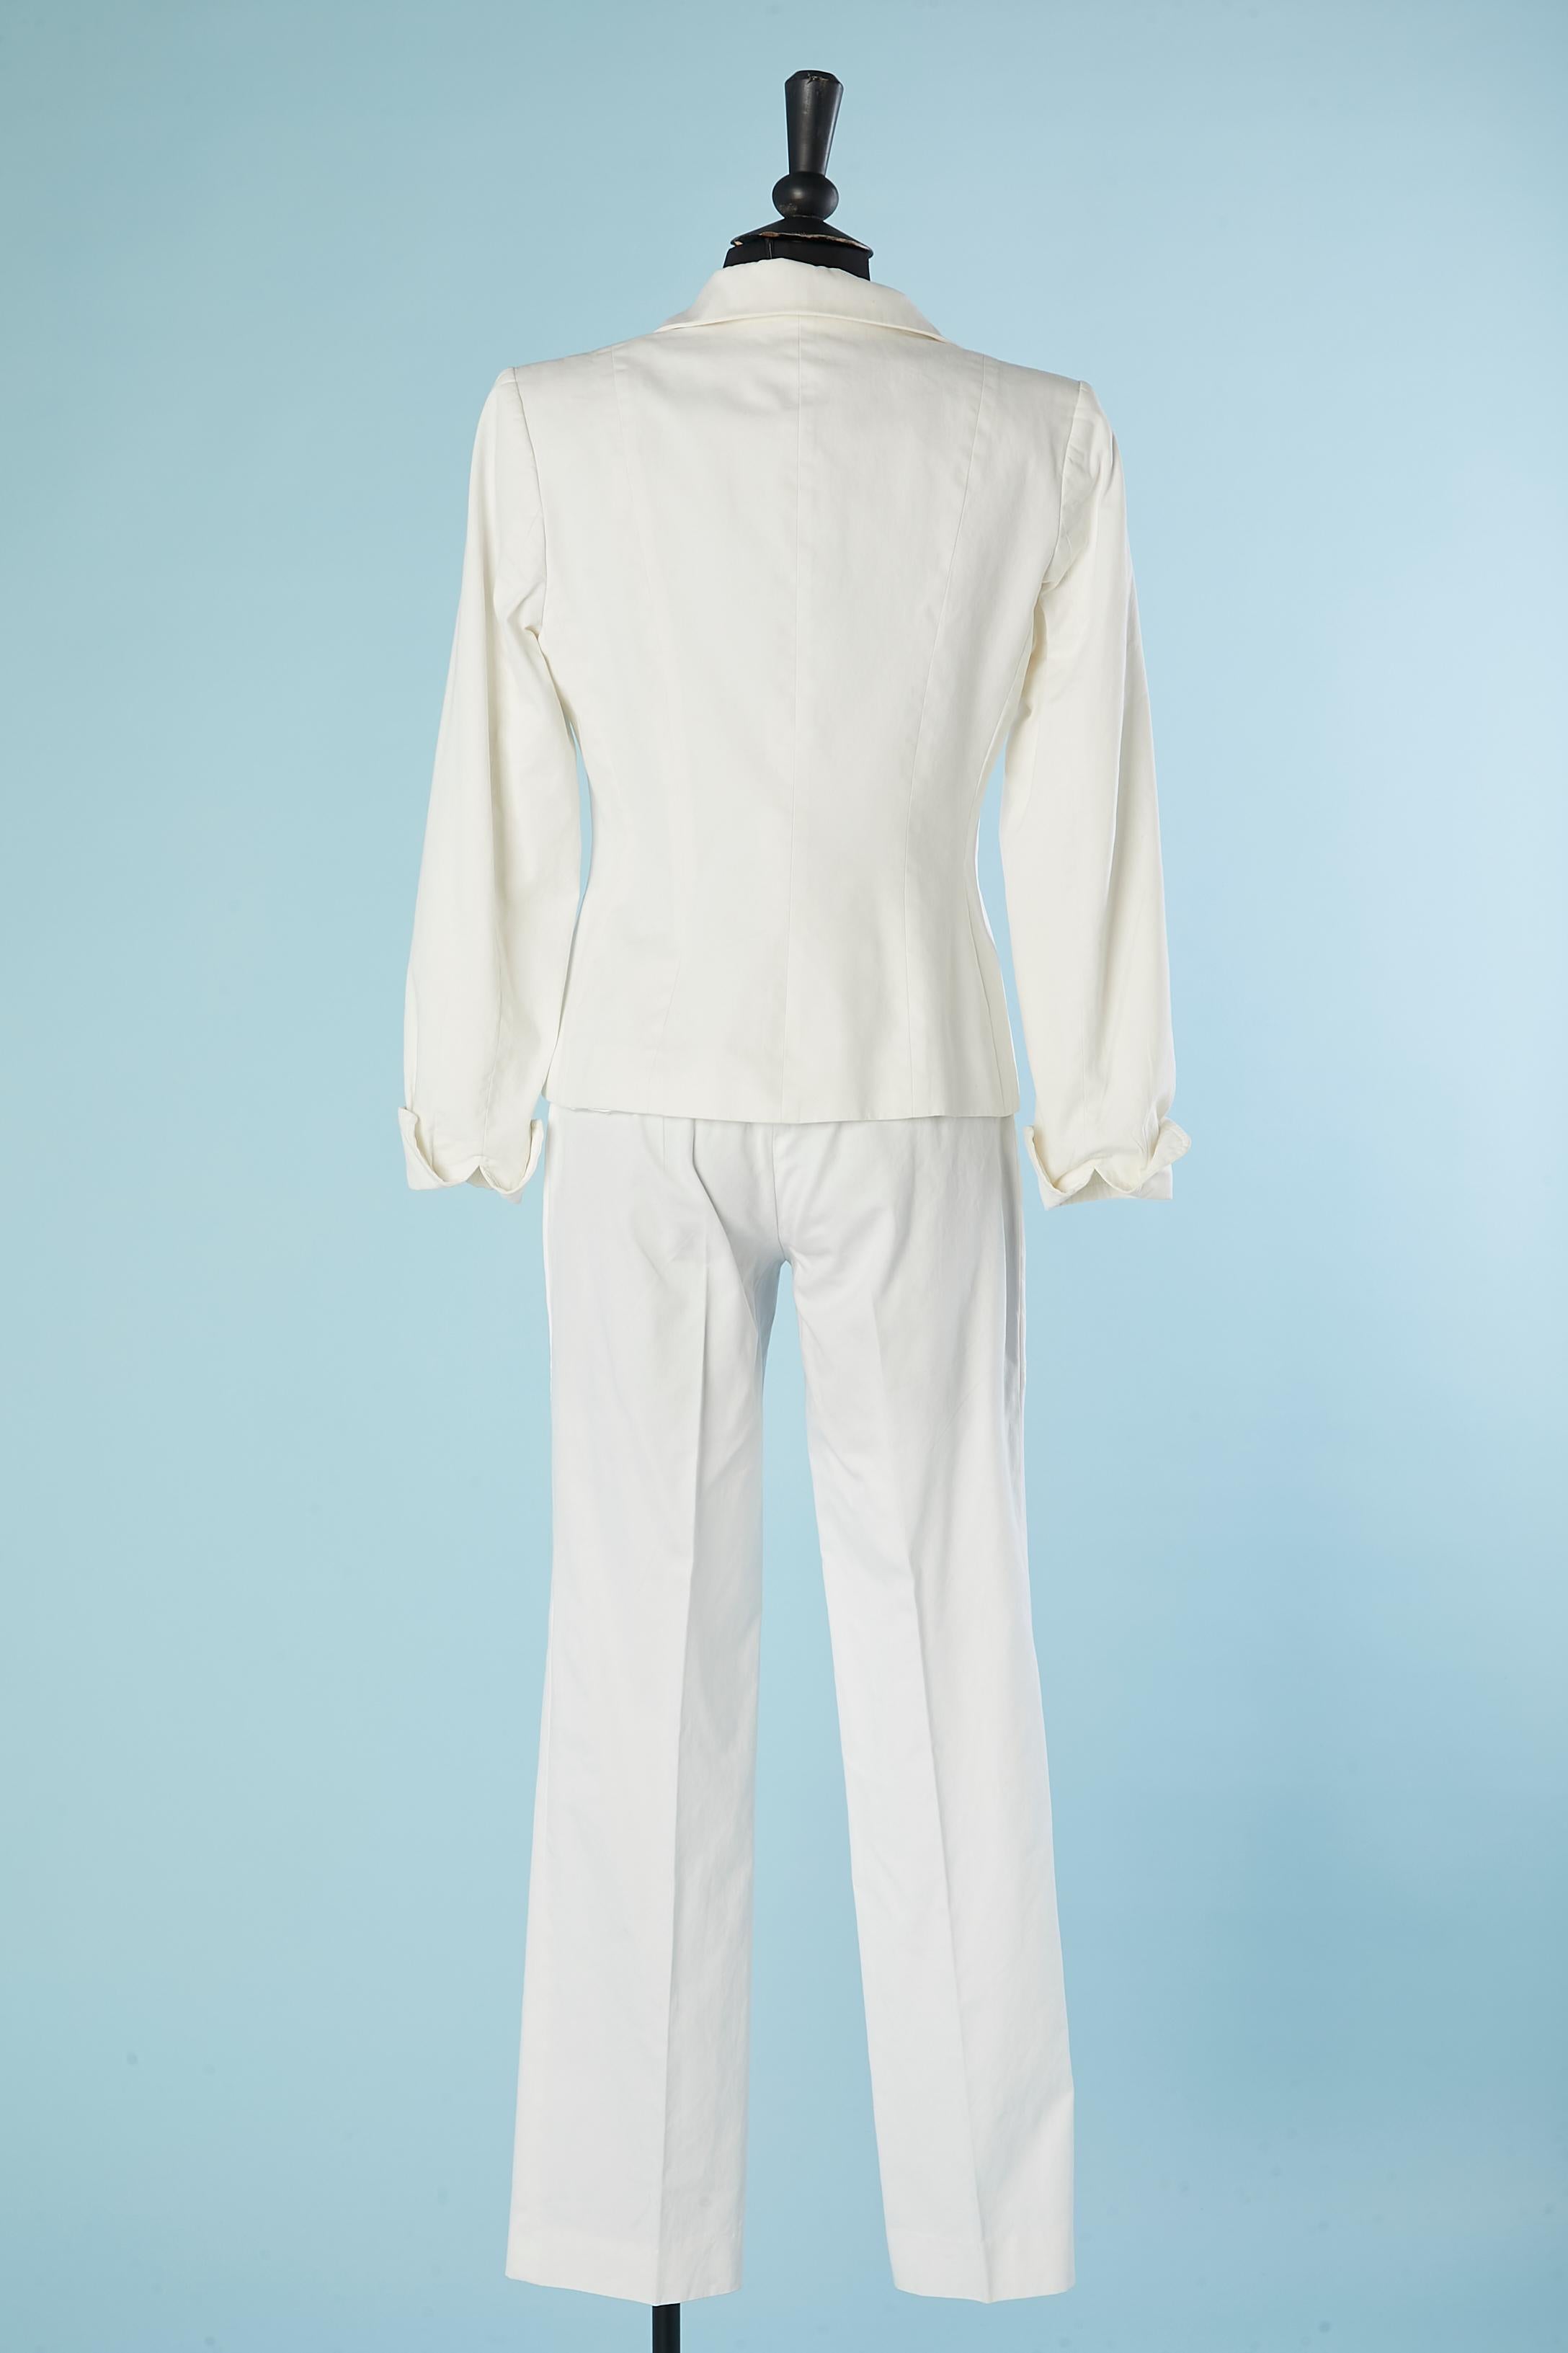 Women's Trouser-suit in white cotton with embroideries on pockets Christian Lacroix For Sale